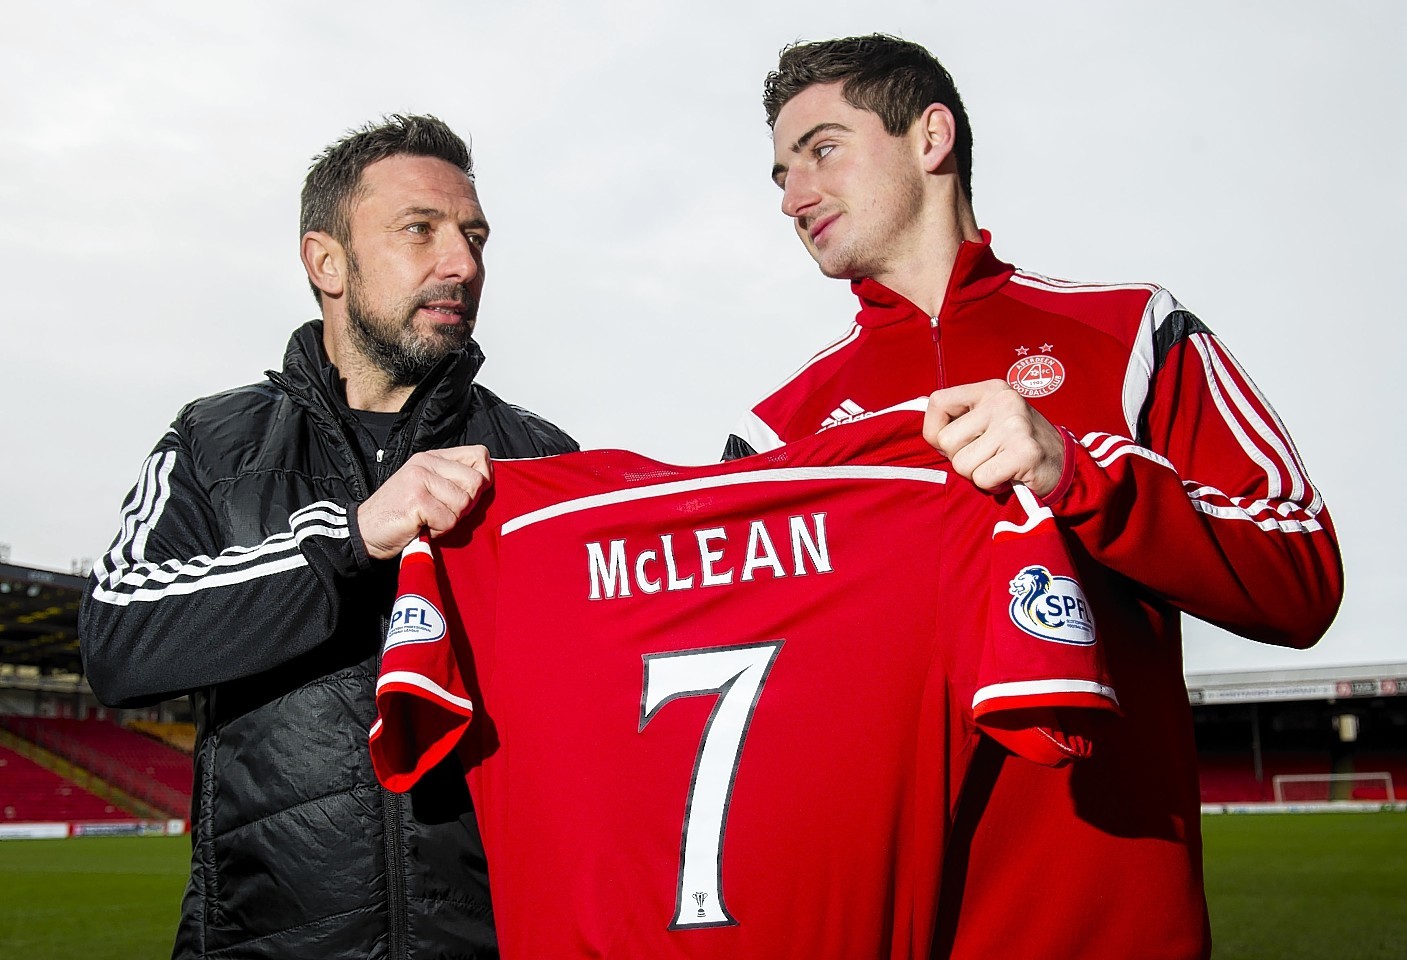 The signing of Kenny McLean has proven to be a good piece of business